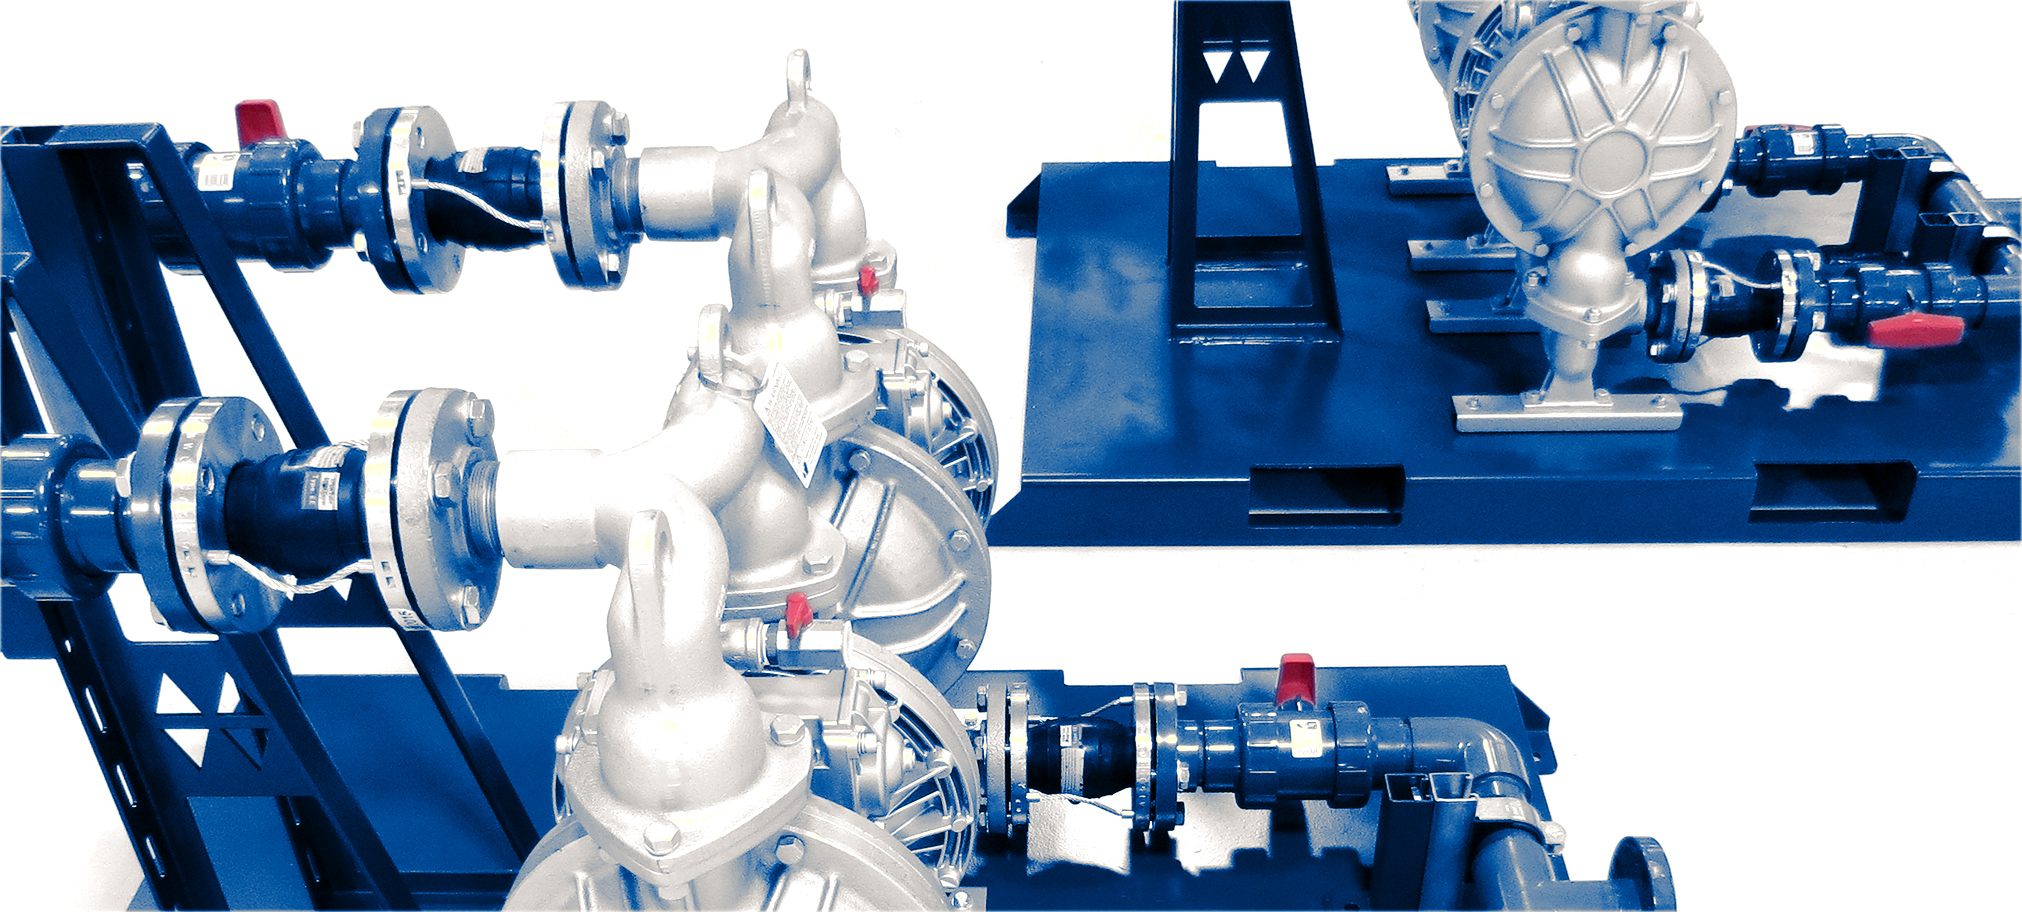 Filter Press Pump Skid Designs Include AOD (Air-Operated Diaphragm) Feed Pumps Mounted on a Steel Skid Base.